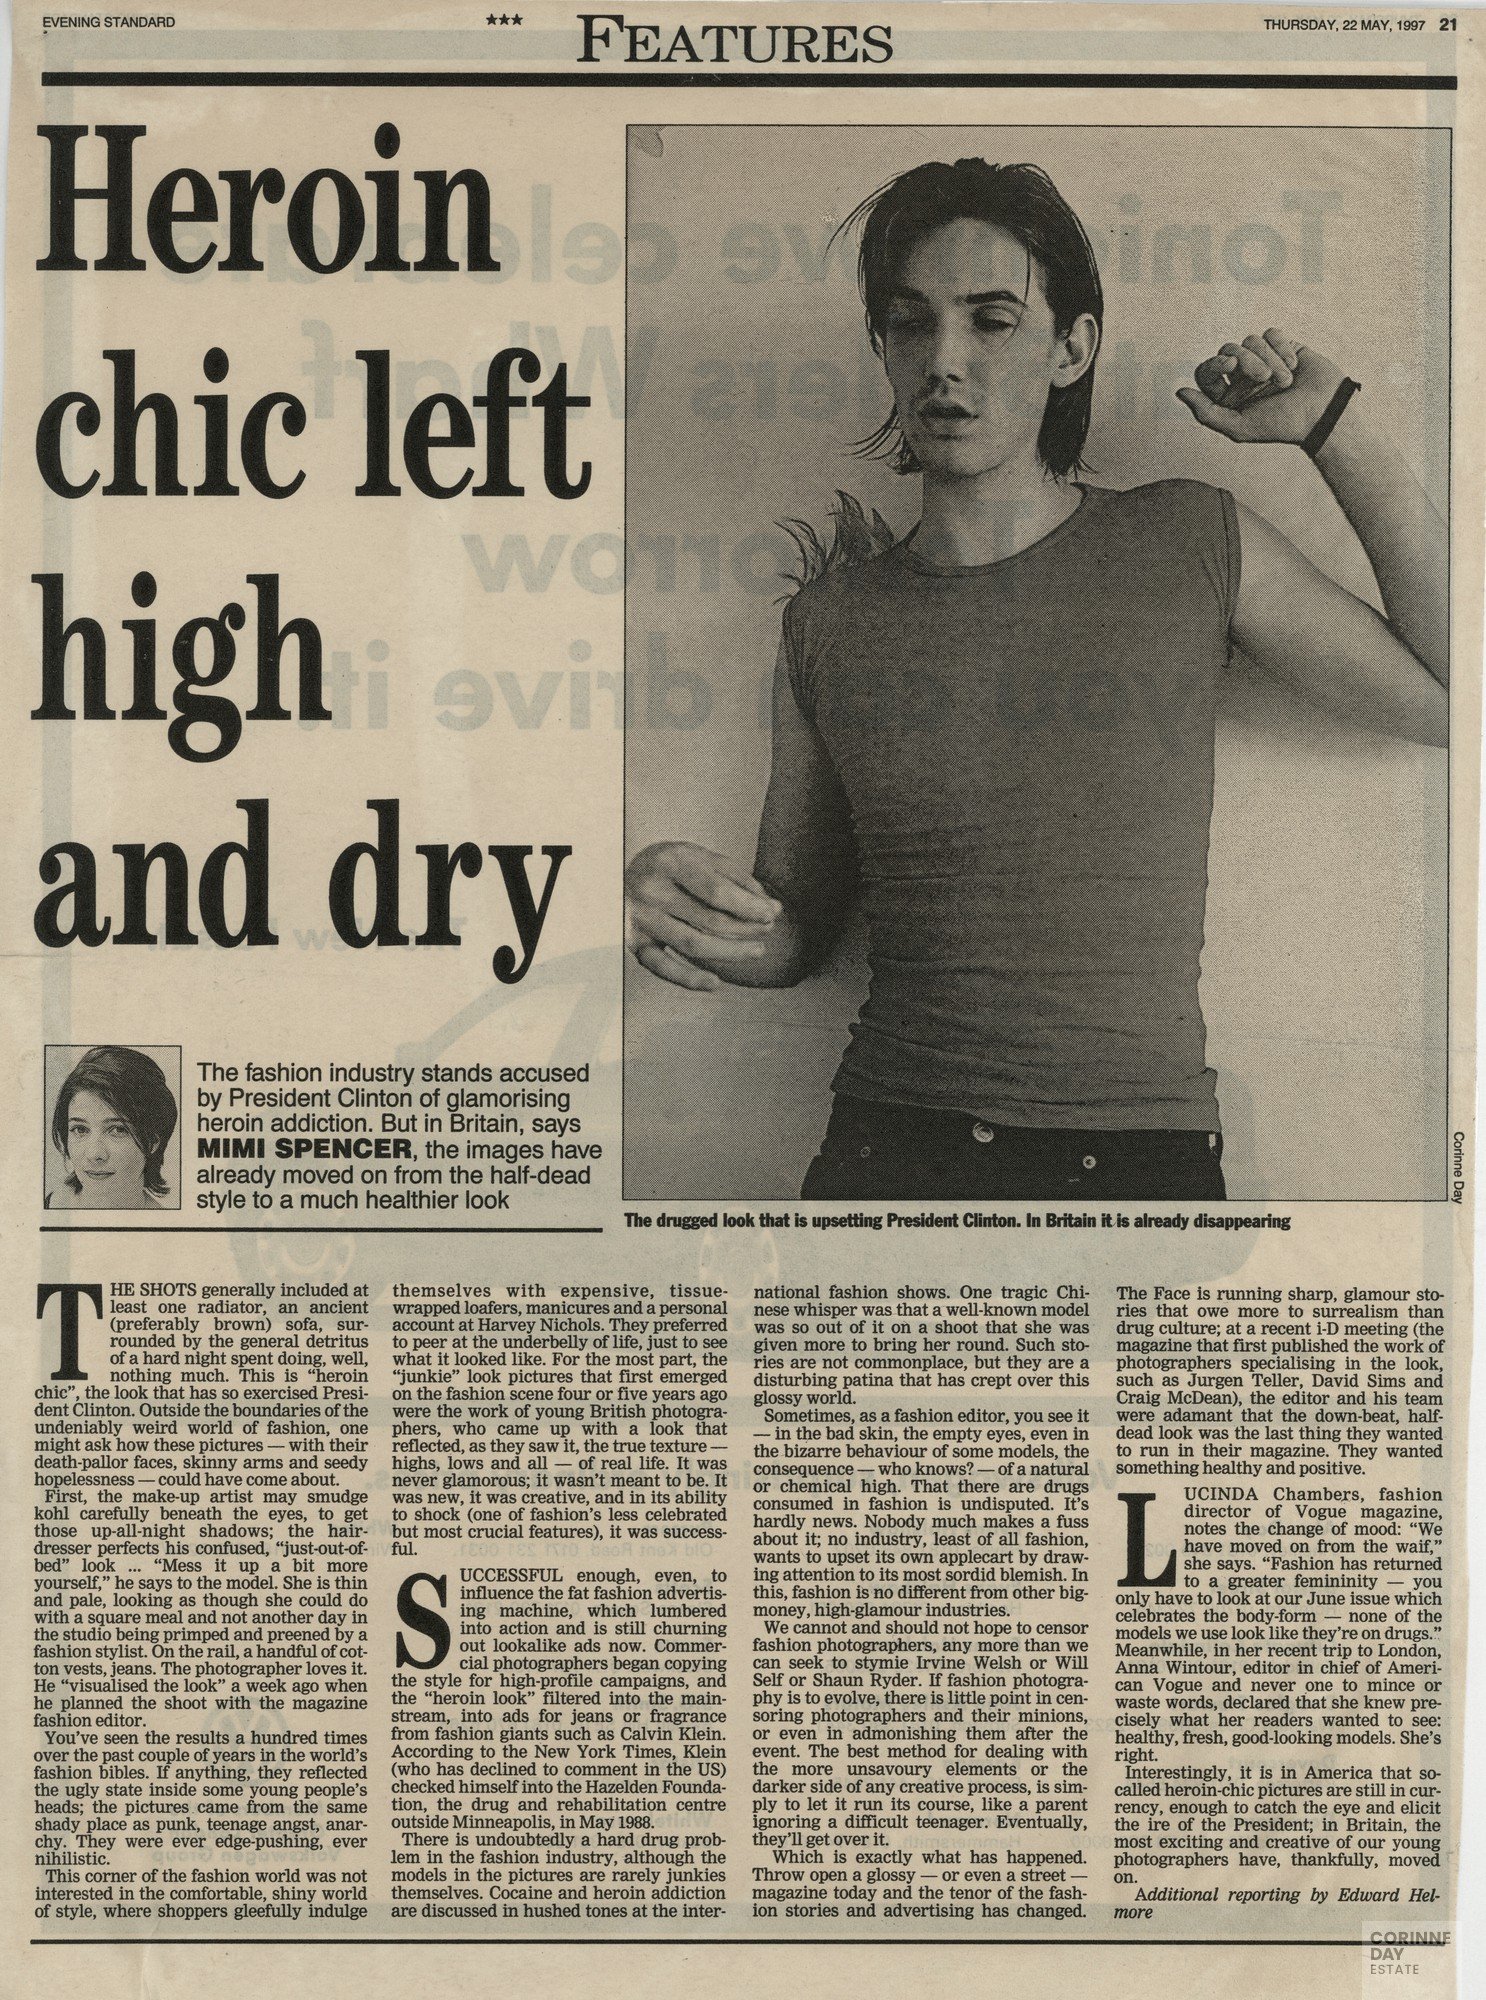 Heroin chic left high and dry, Evening Standard, 22 May 1997 — Image 1 of 1